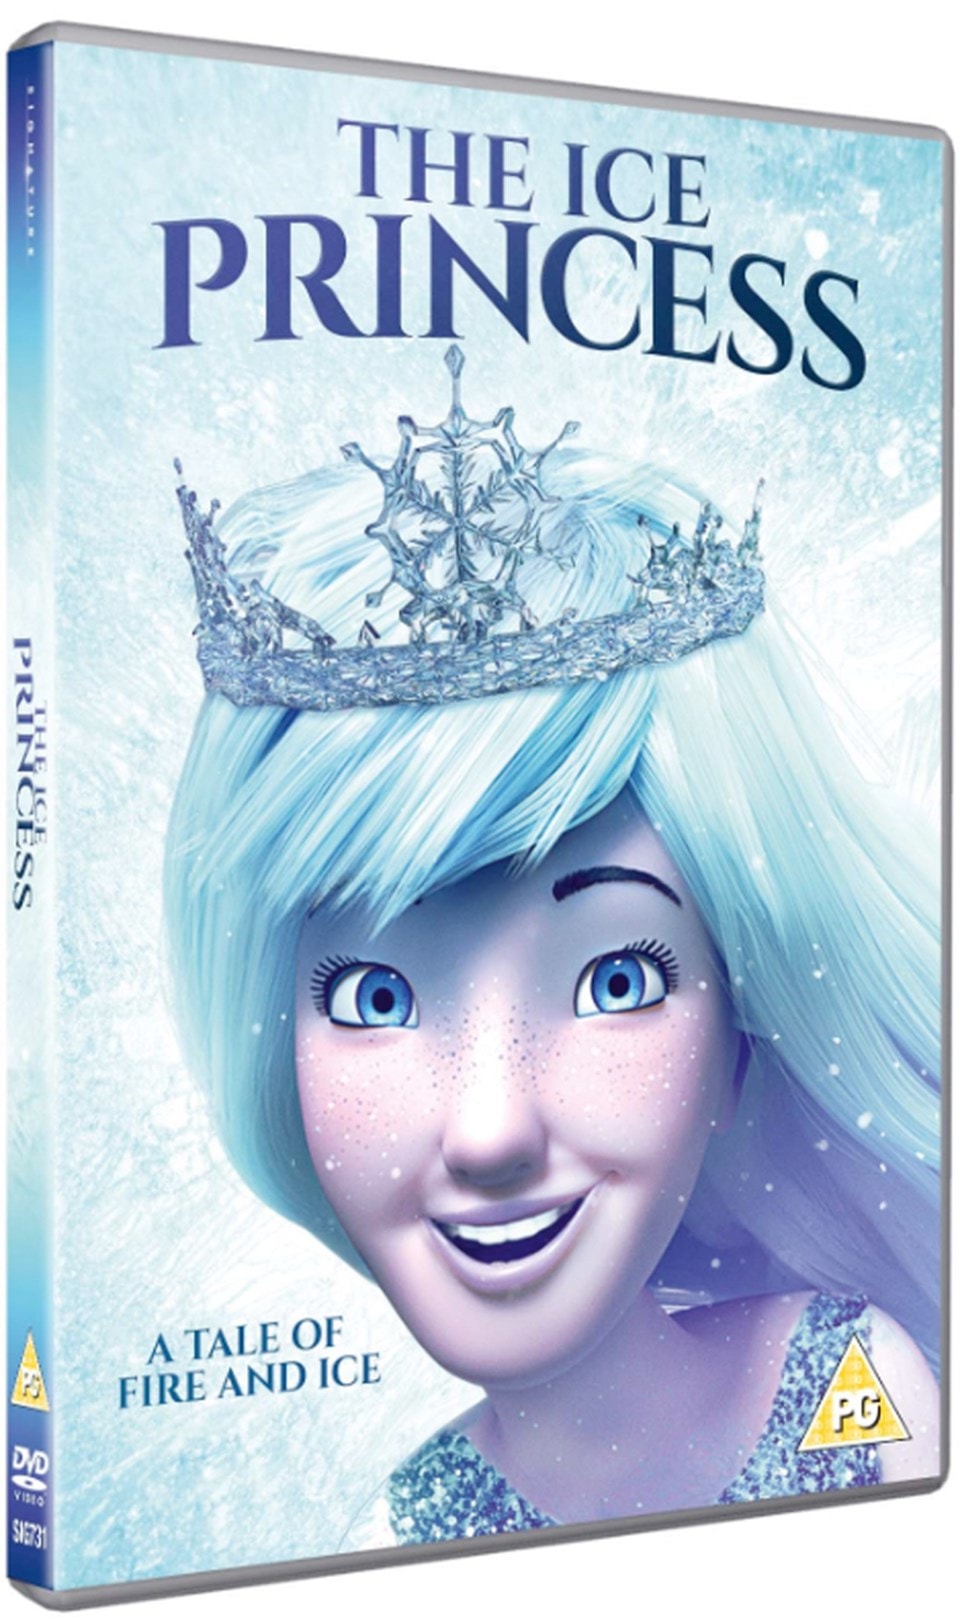 The Ice Princess DVD Free shipping over £20 HMV Store